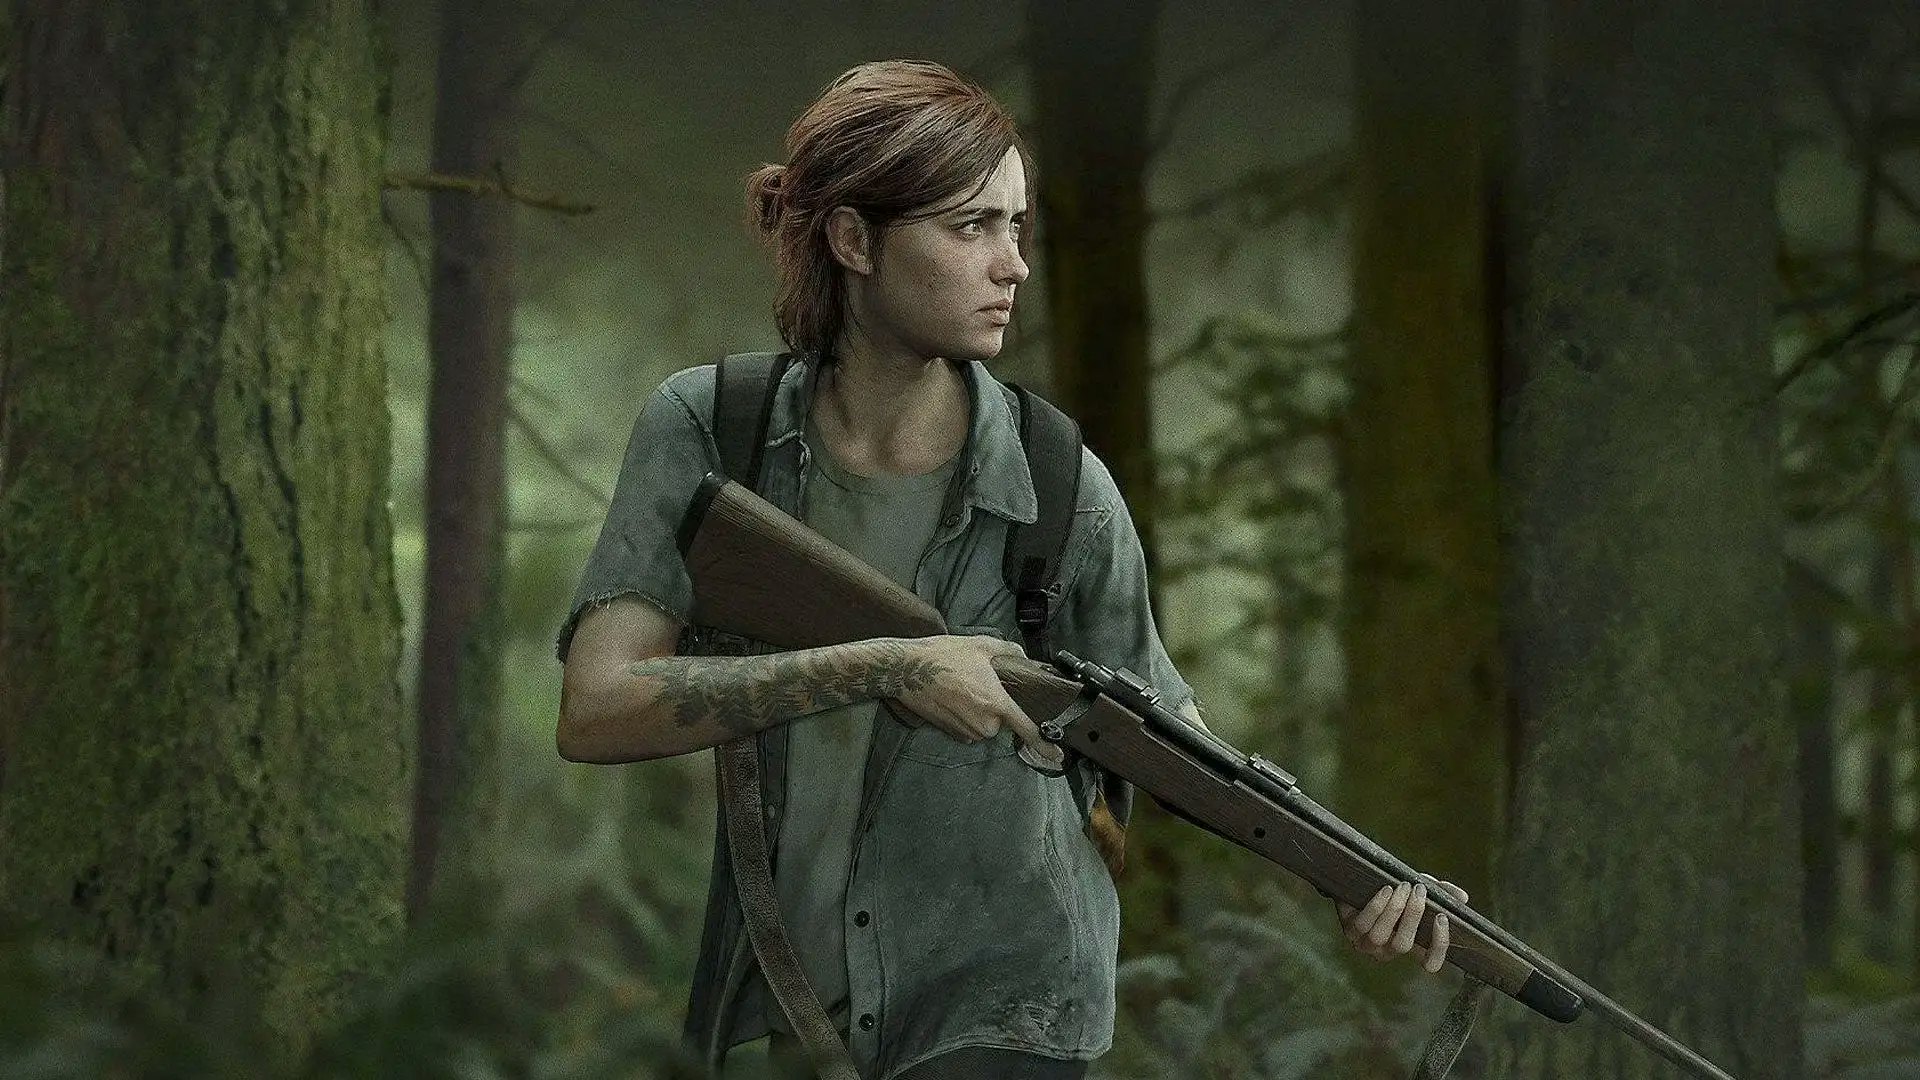 Last Of Us Multiplayer Not Ready To Show, Naughty Dog Says